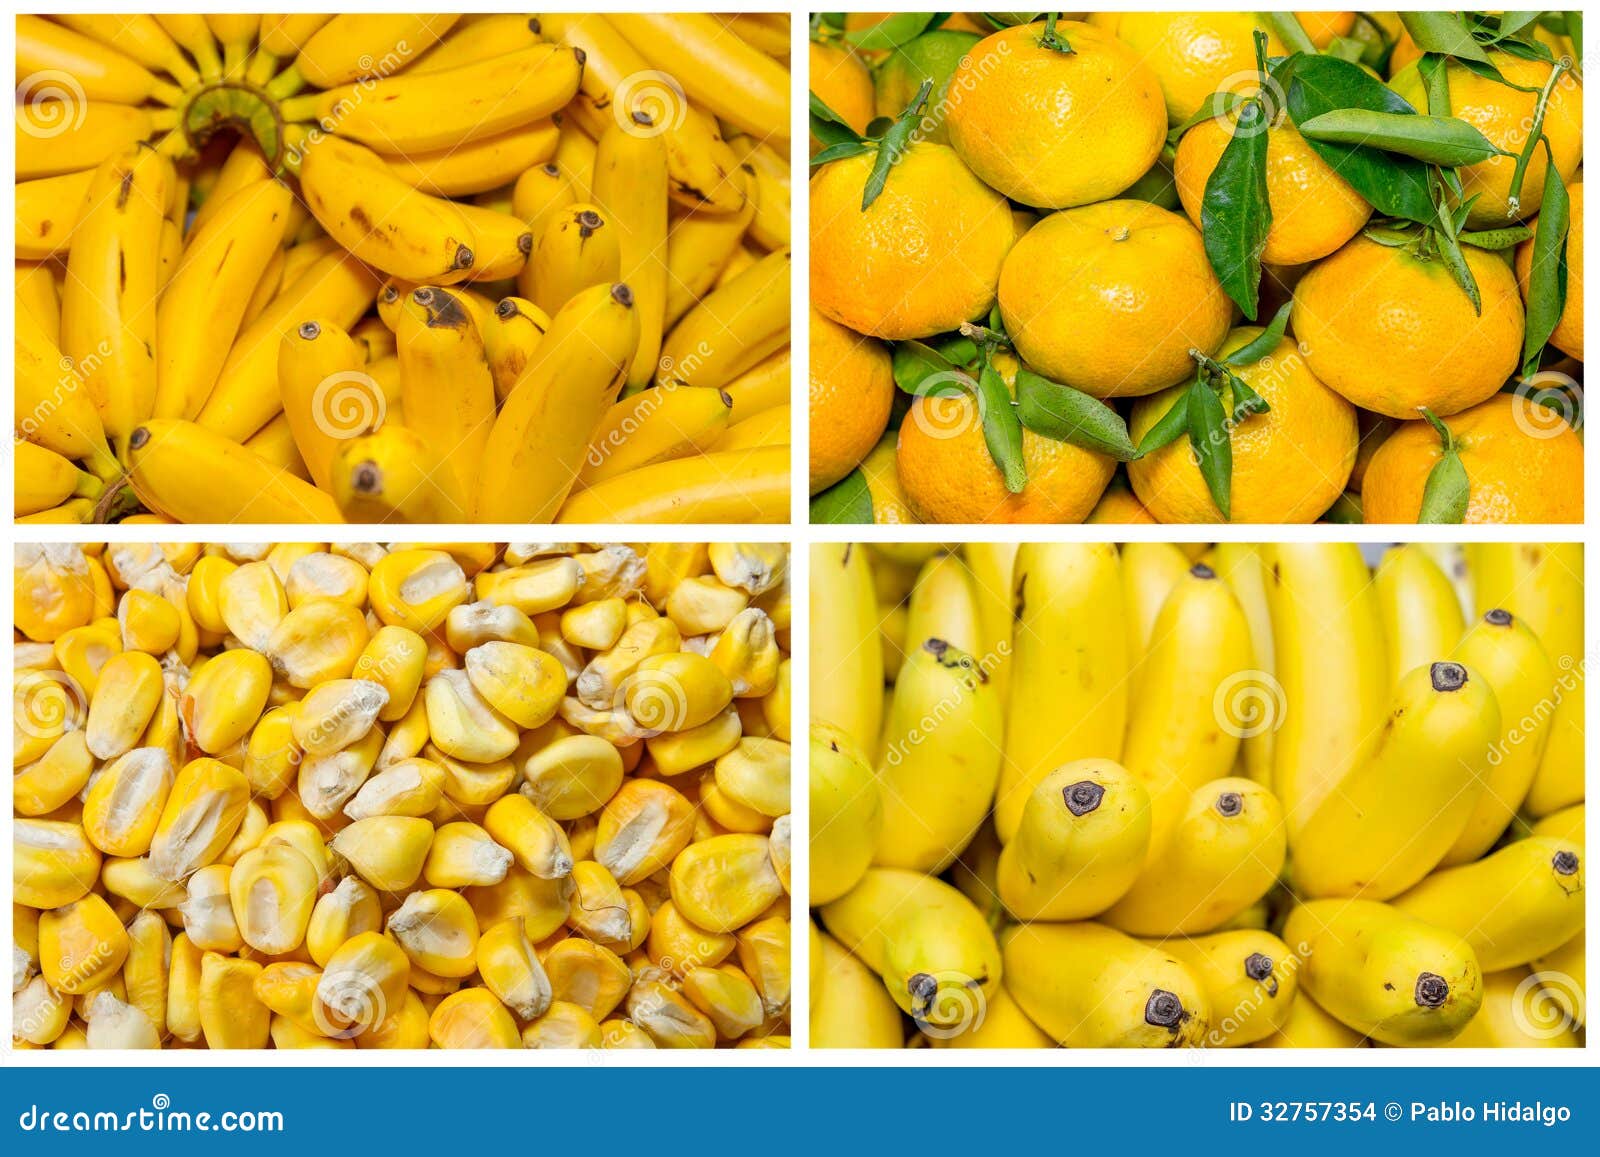 Collage From Fresh Fruit And Vegetables Stock Photo - Image of nature ...